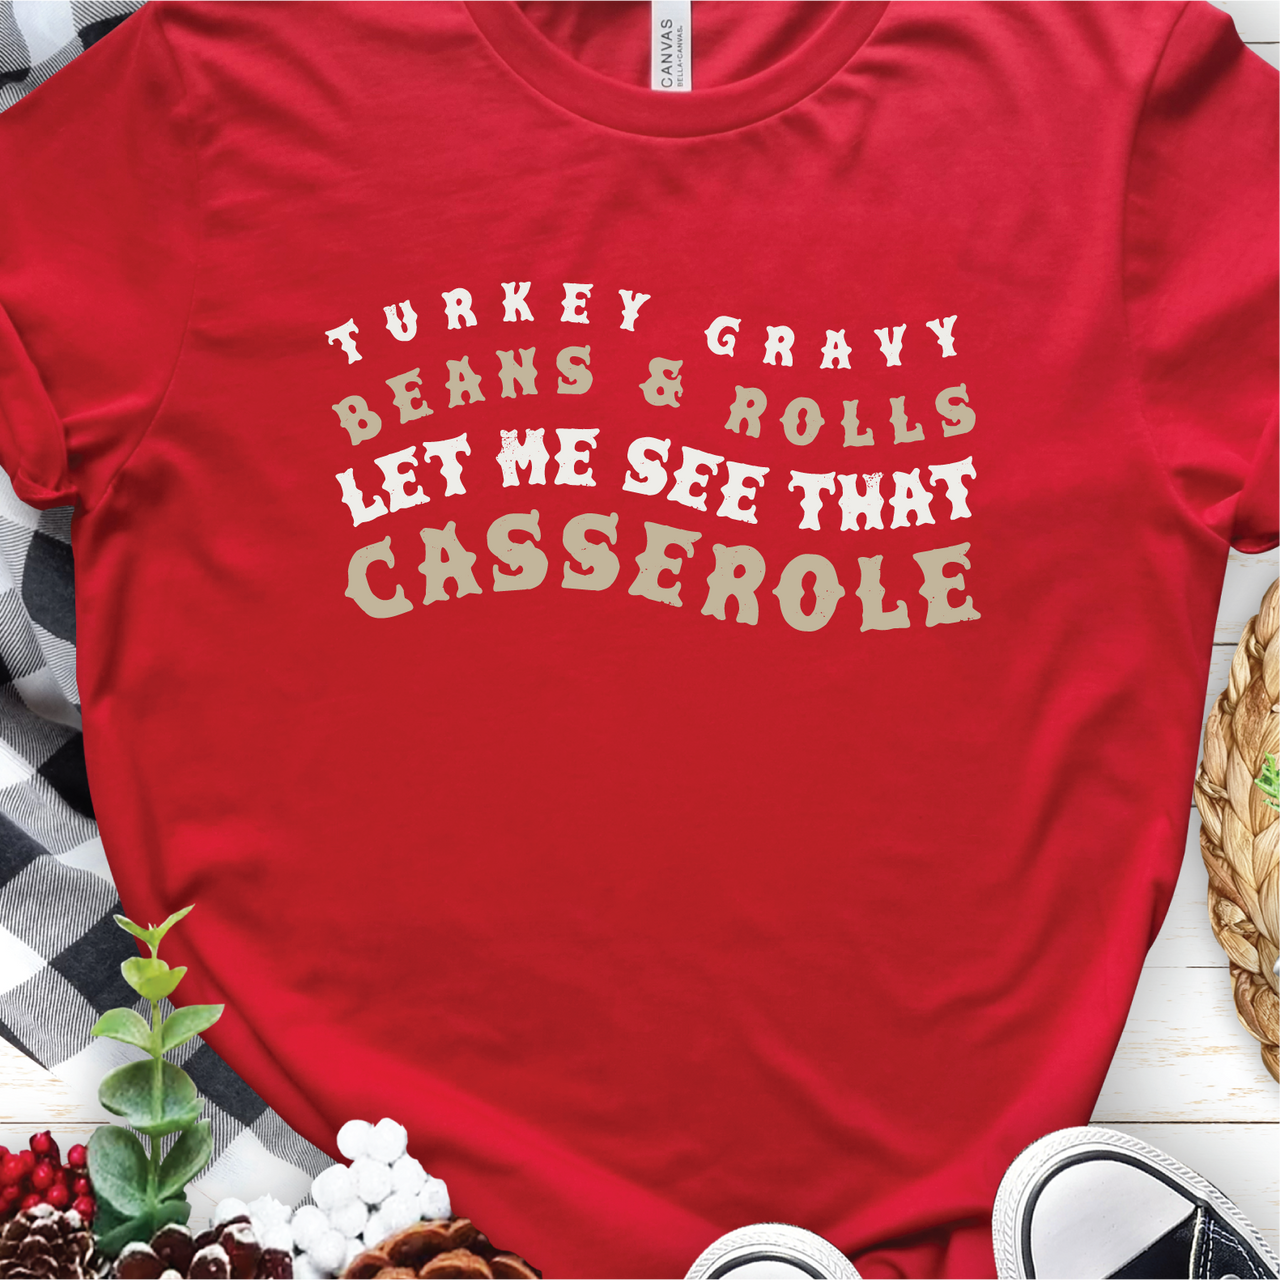 "Let Me See That Casserole" Unisex Tee